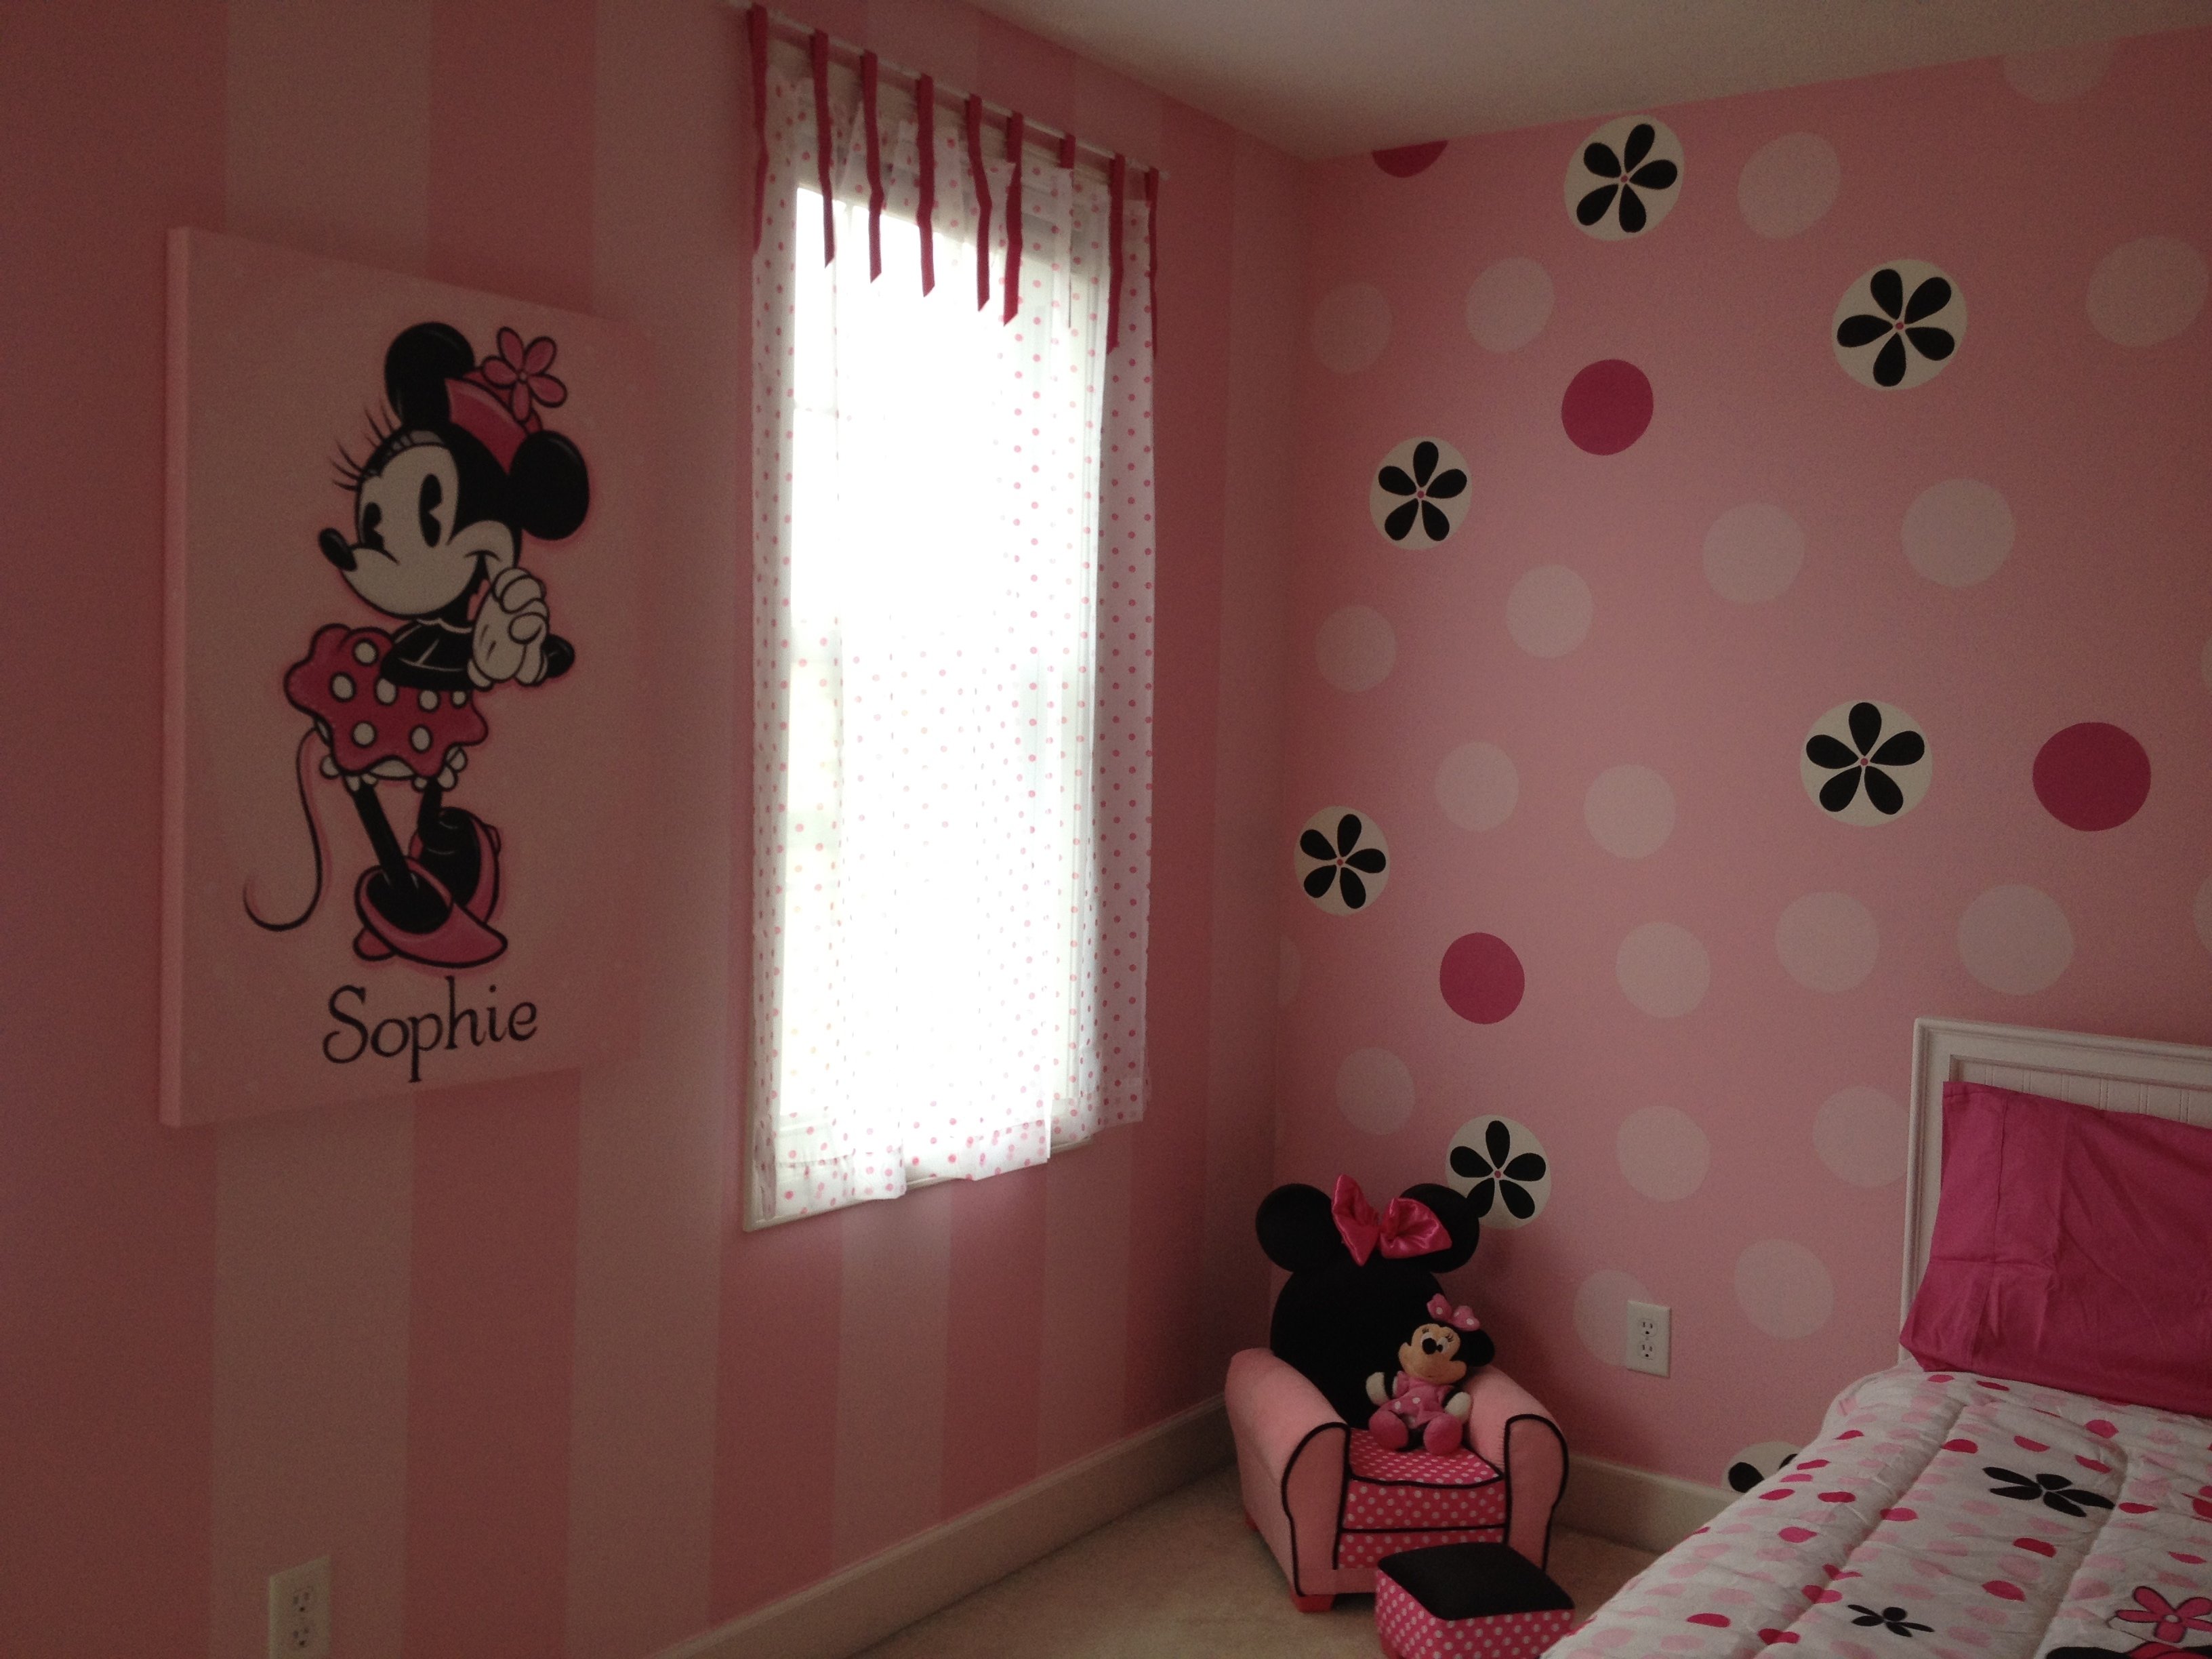 10 Great Minnie Mouse Room Decorating Ideas decorations minnie mouse room decor for toddlers e28093 all about 2023